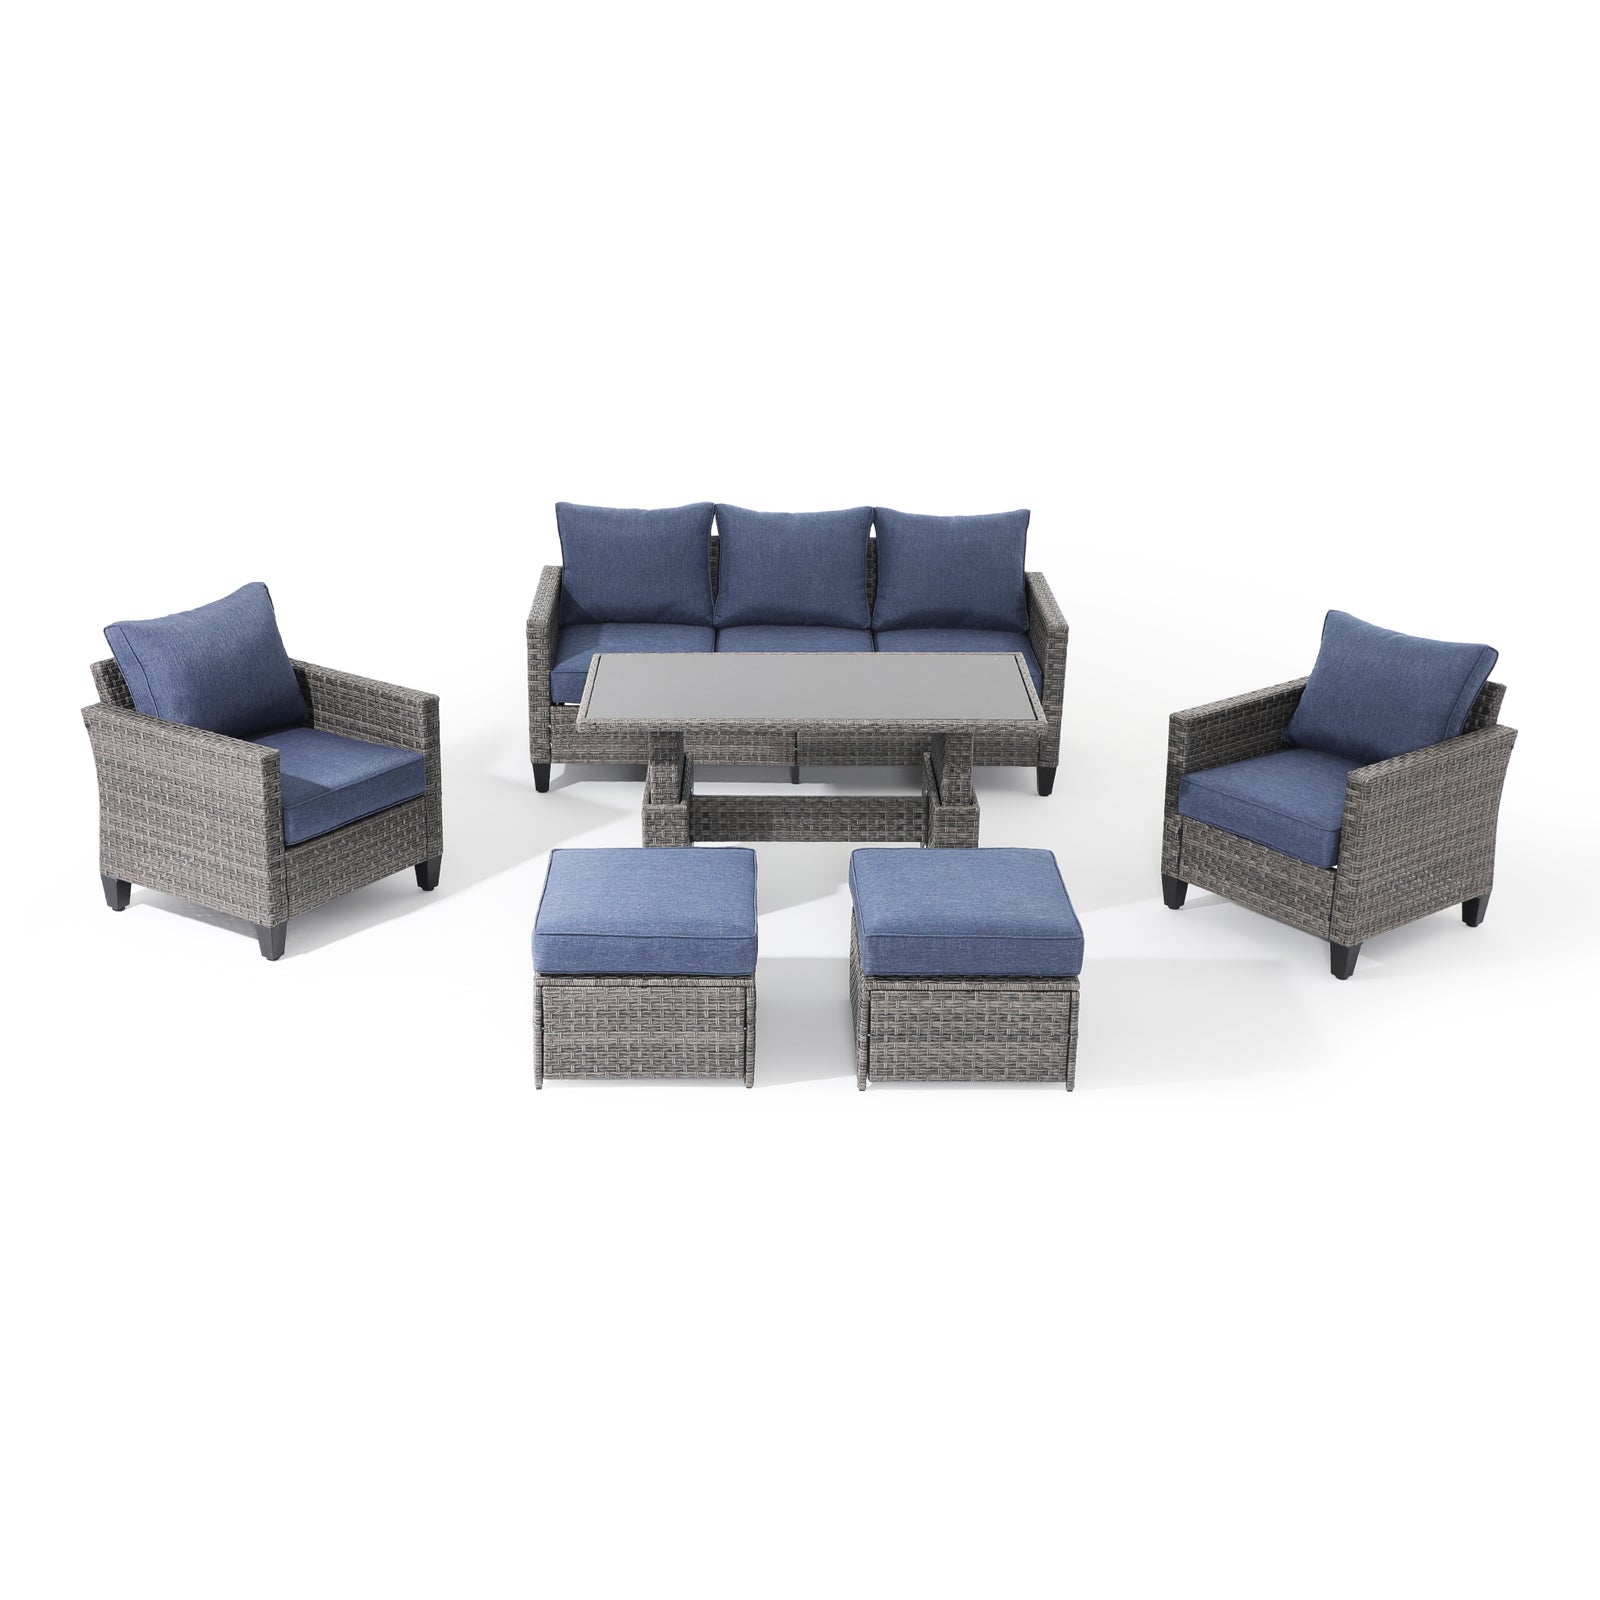 #Piece_6-pc#Color_Navy Blue#Style_with Ottomans & Table